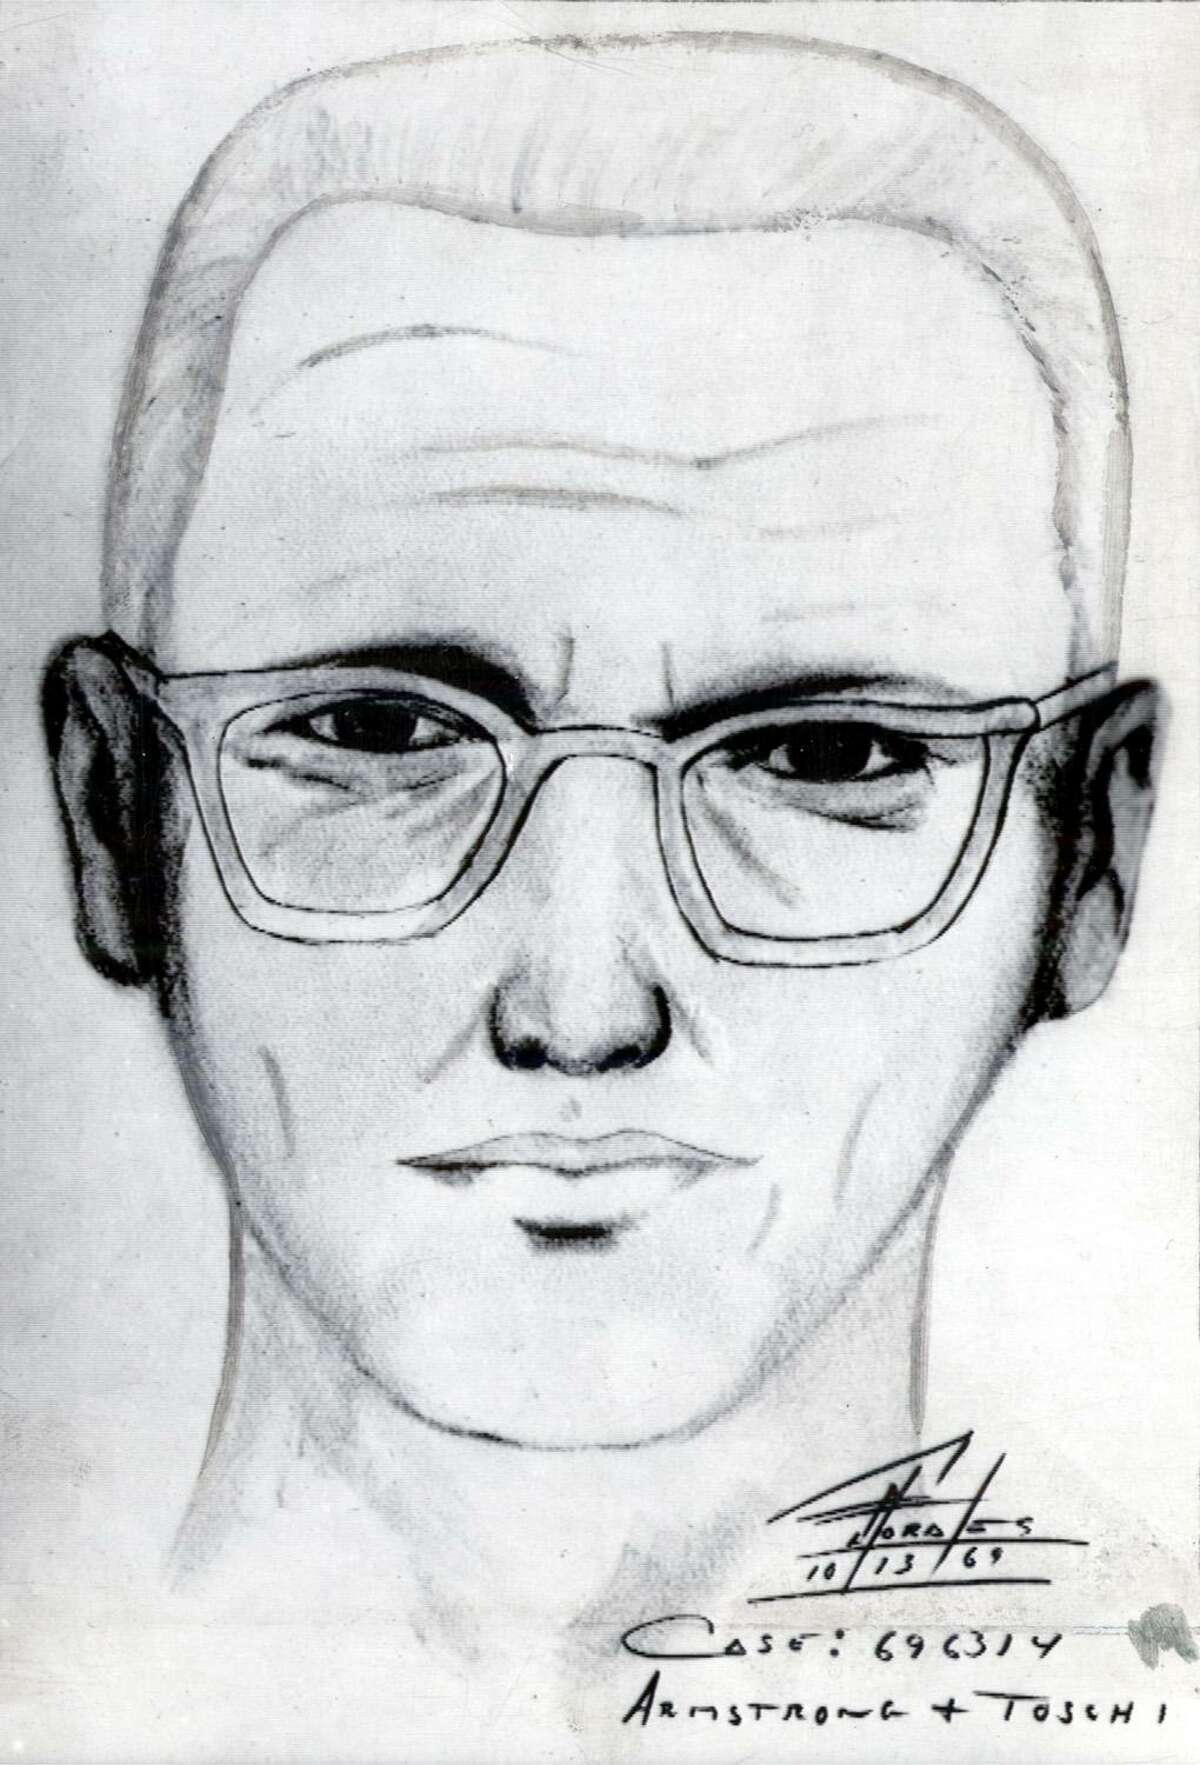 Police sketch of the man suspected of being the "Zodiak Killer," 1969.